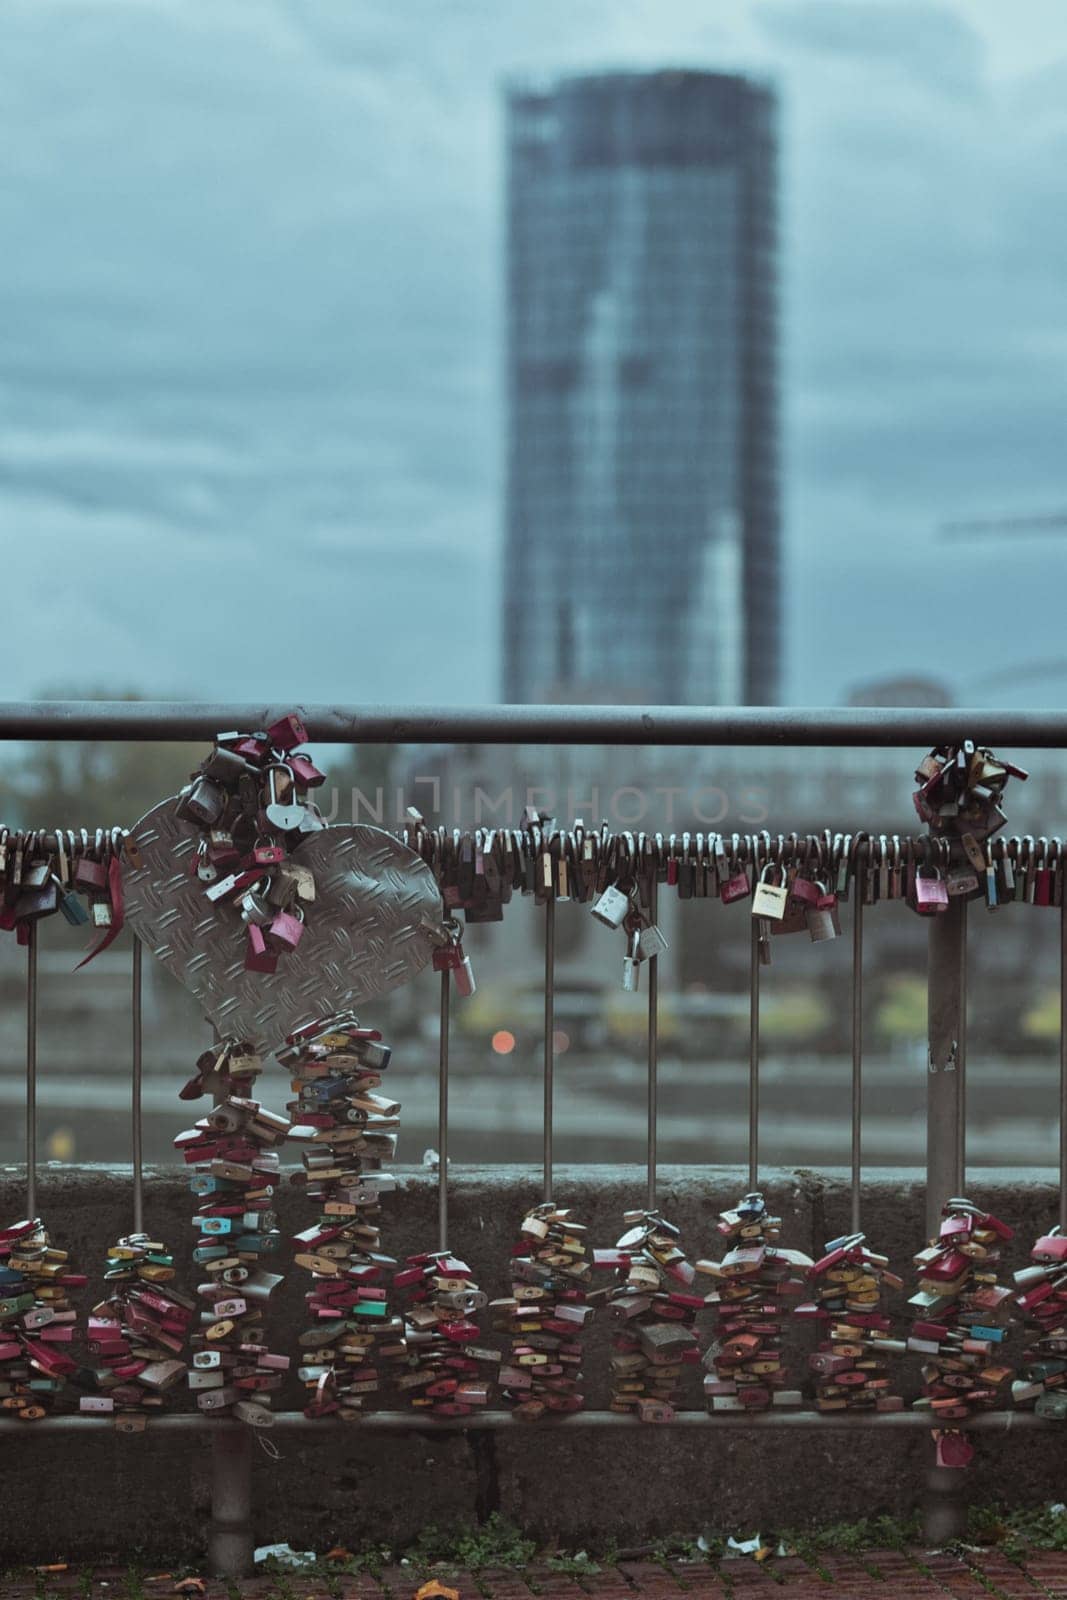 Vertical shot of many love locks on the railing of the Hohenzollern Bridge in Cologne, Germany by rherrmannde